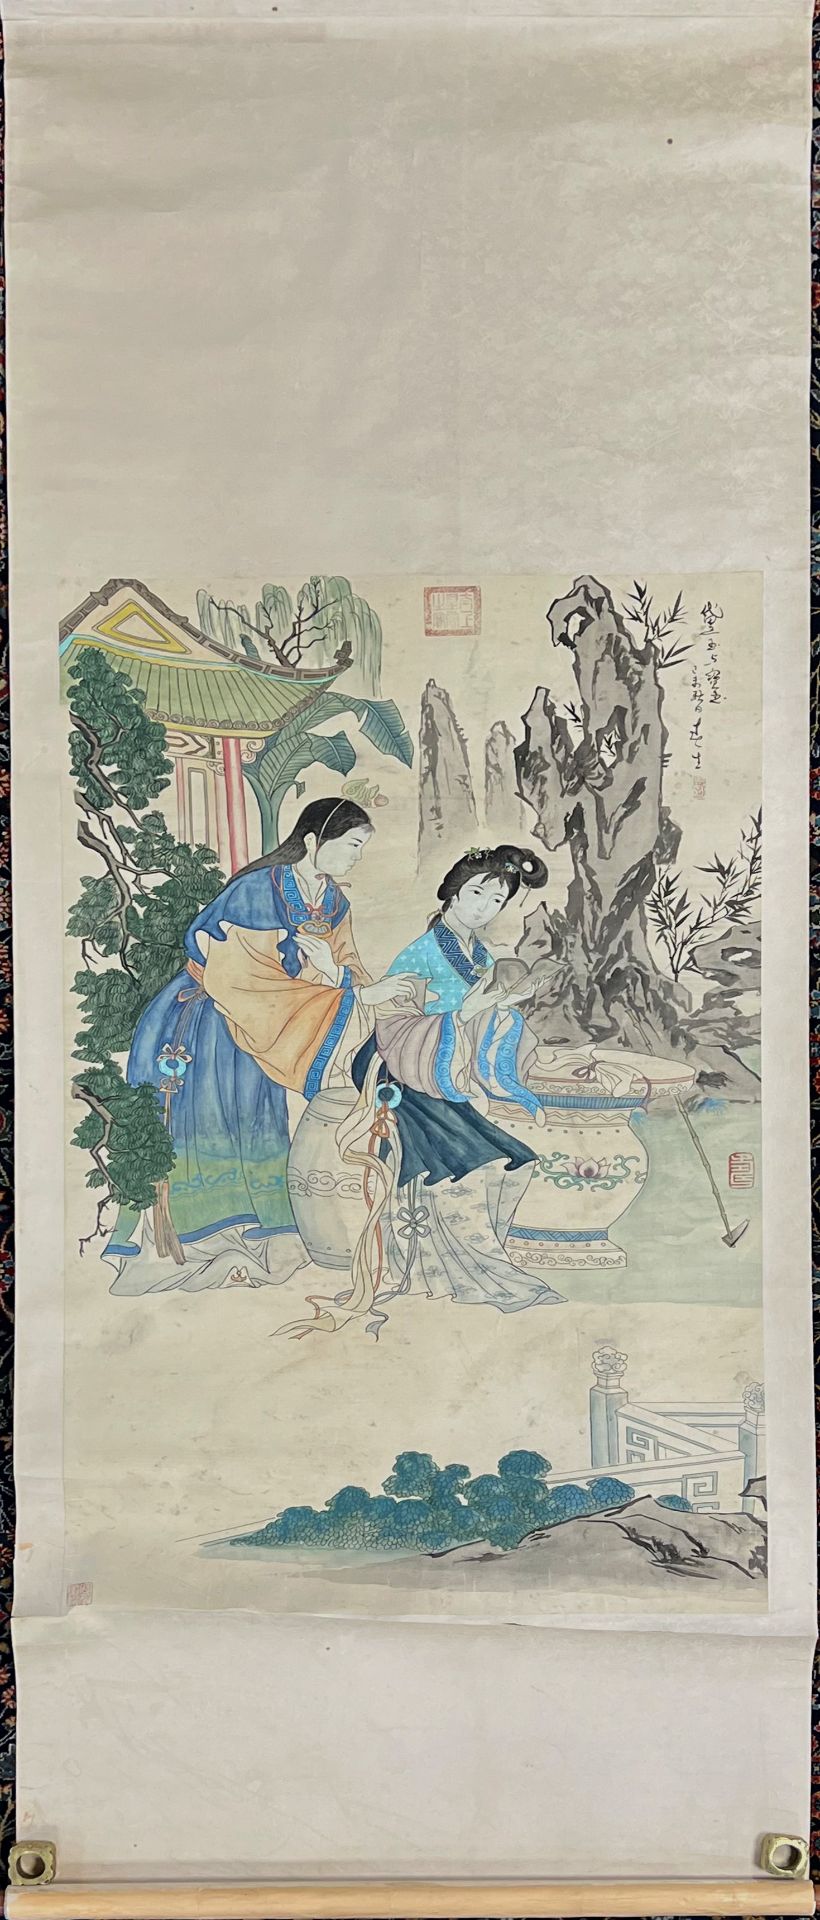 Us UNKNOWN ARTISTS (XX). Scroll painting. China. "The Dream of the Red Chamber". - Image 2 of 10